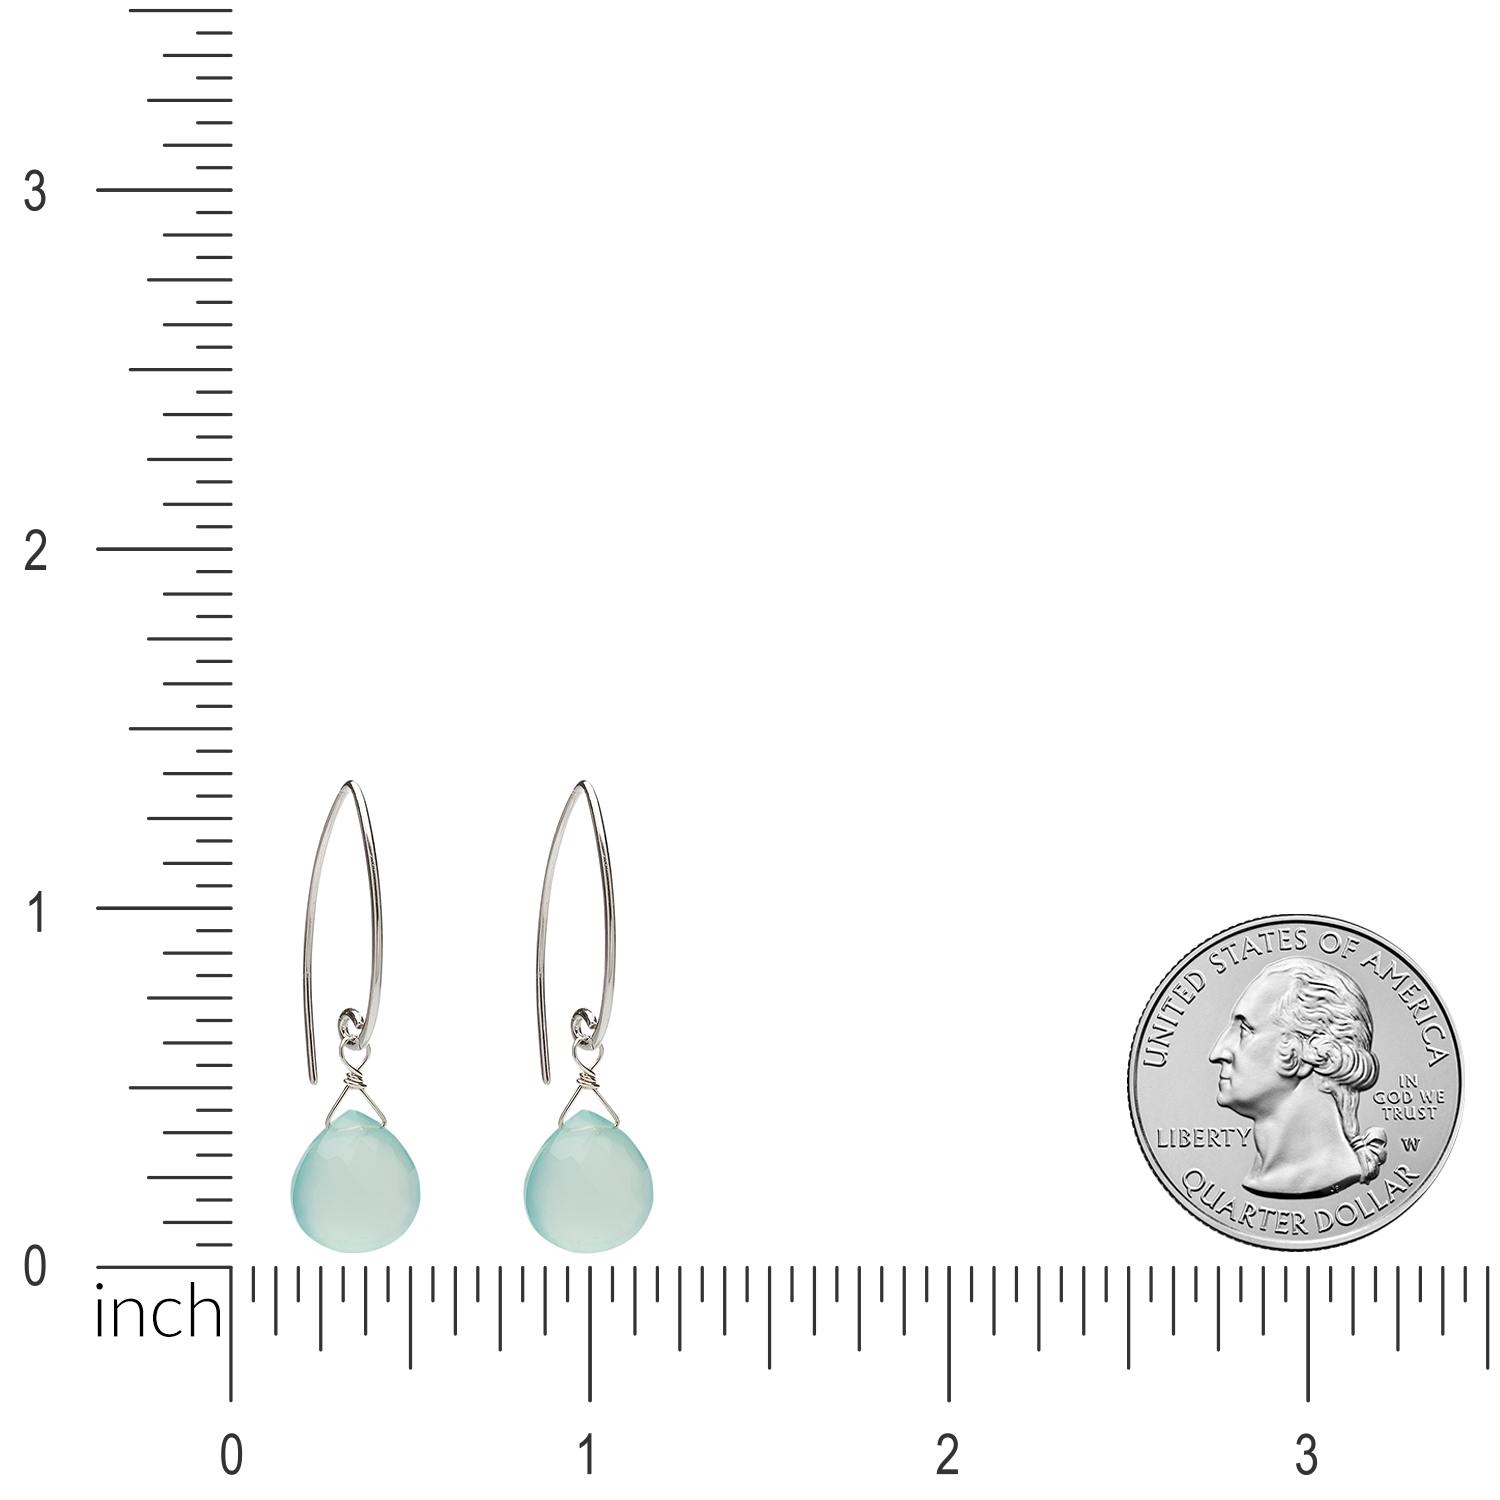 Image of silver and gemstone dangle earrings with ruler and quarter for size comparison